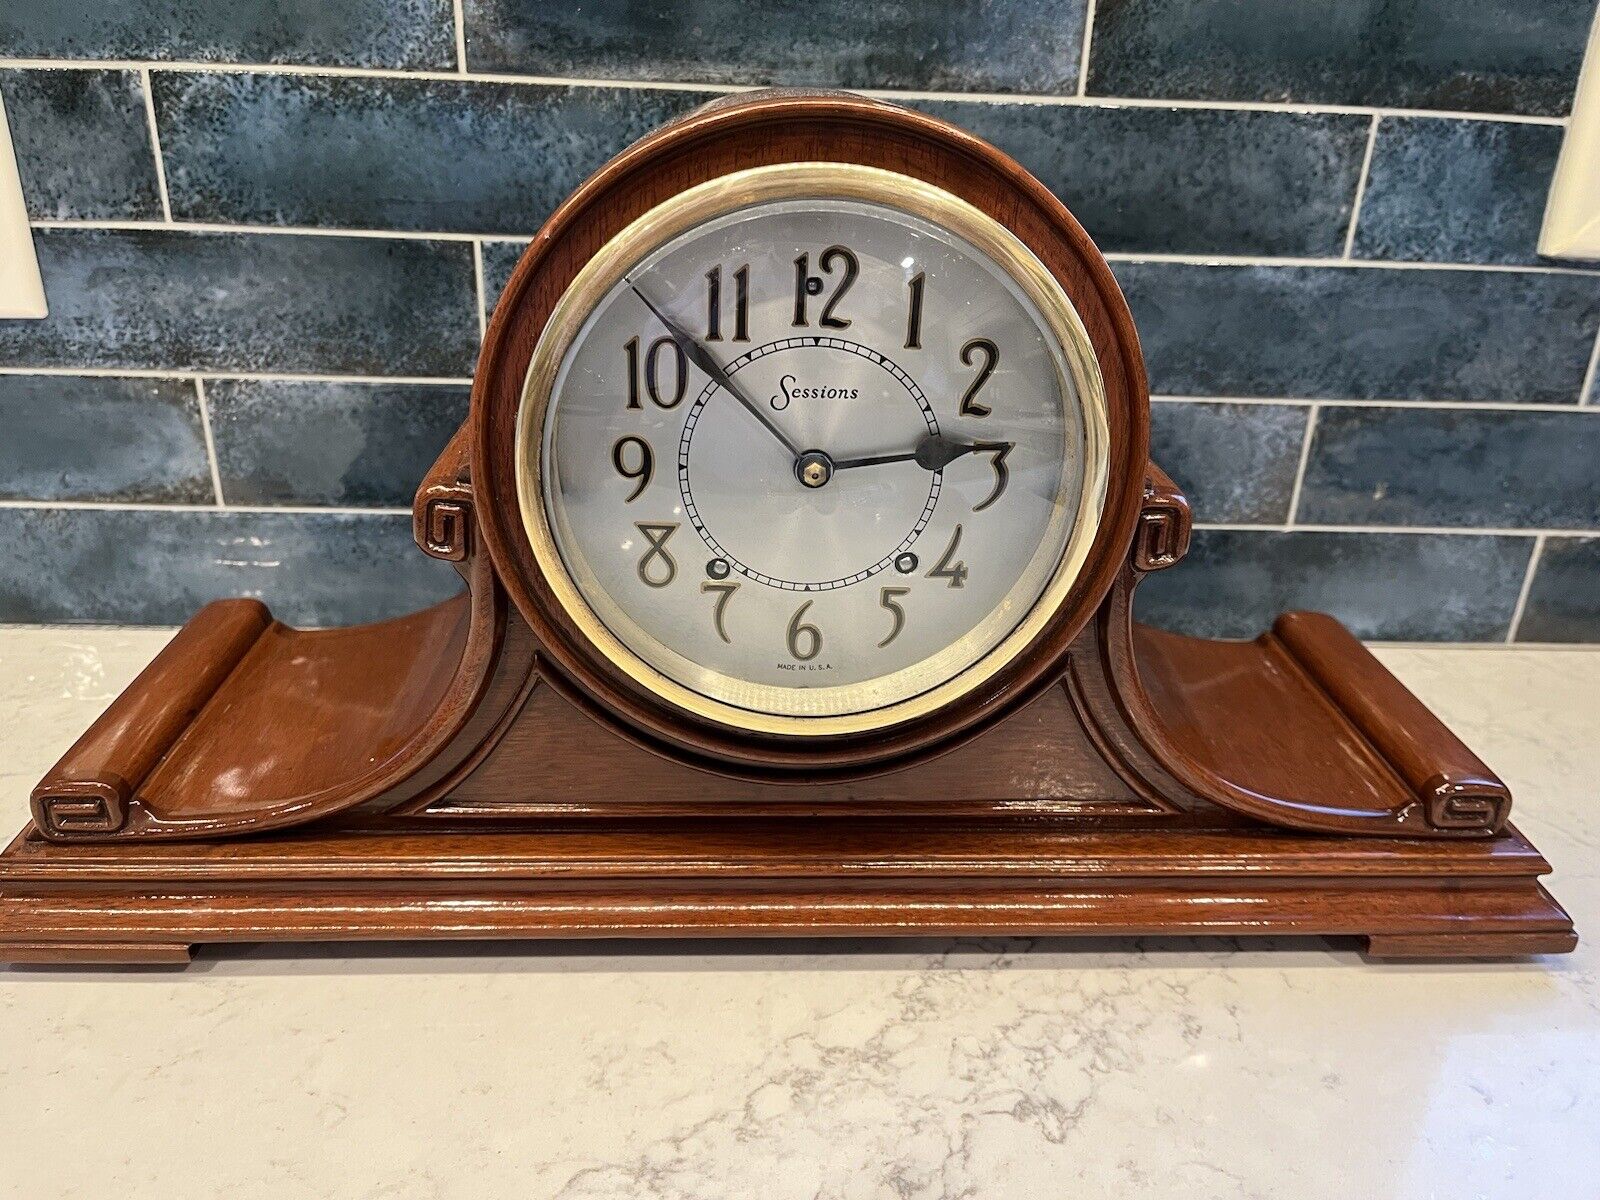 Sessions Mantle Clock Beautifully Restored inside and out ca  1920s fantastic  